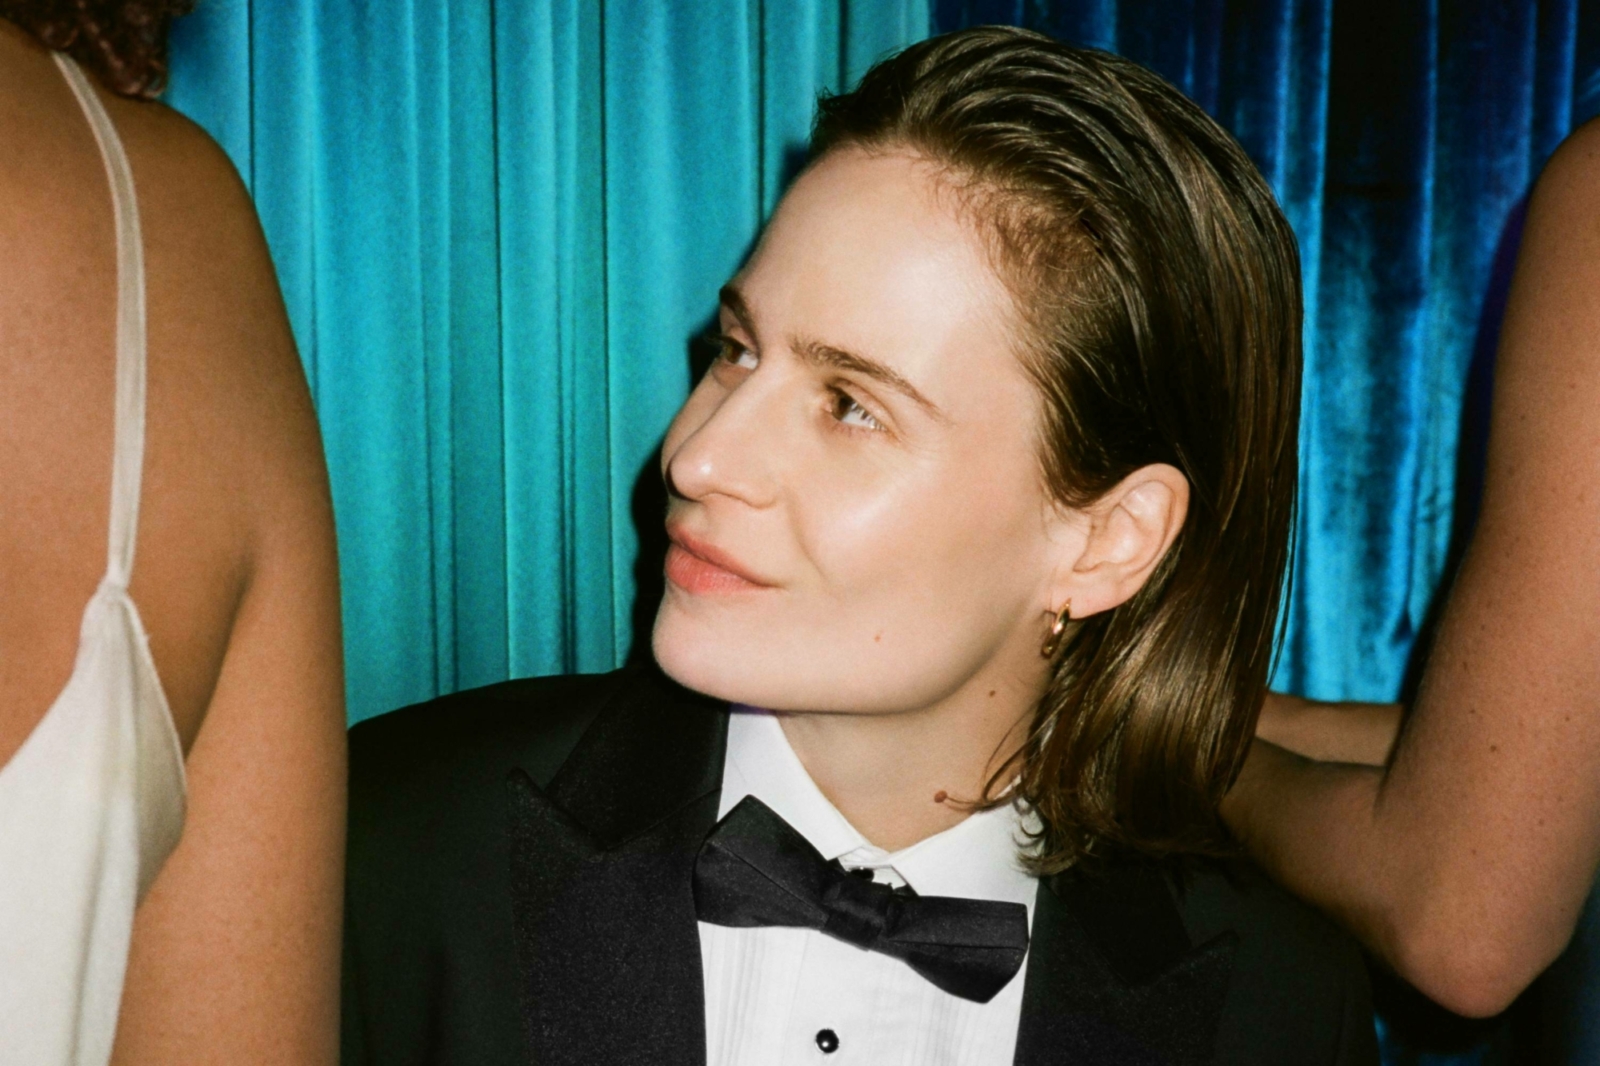 Christine and The Queens is curating next year's Meltdown festival